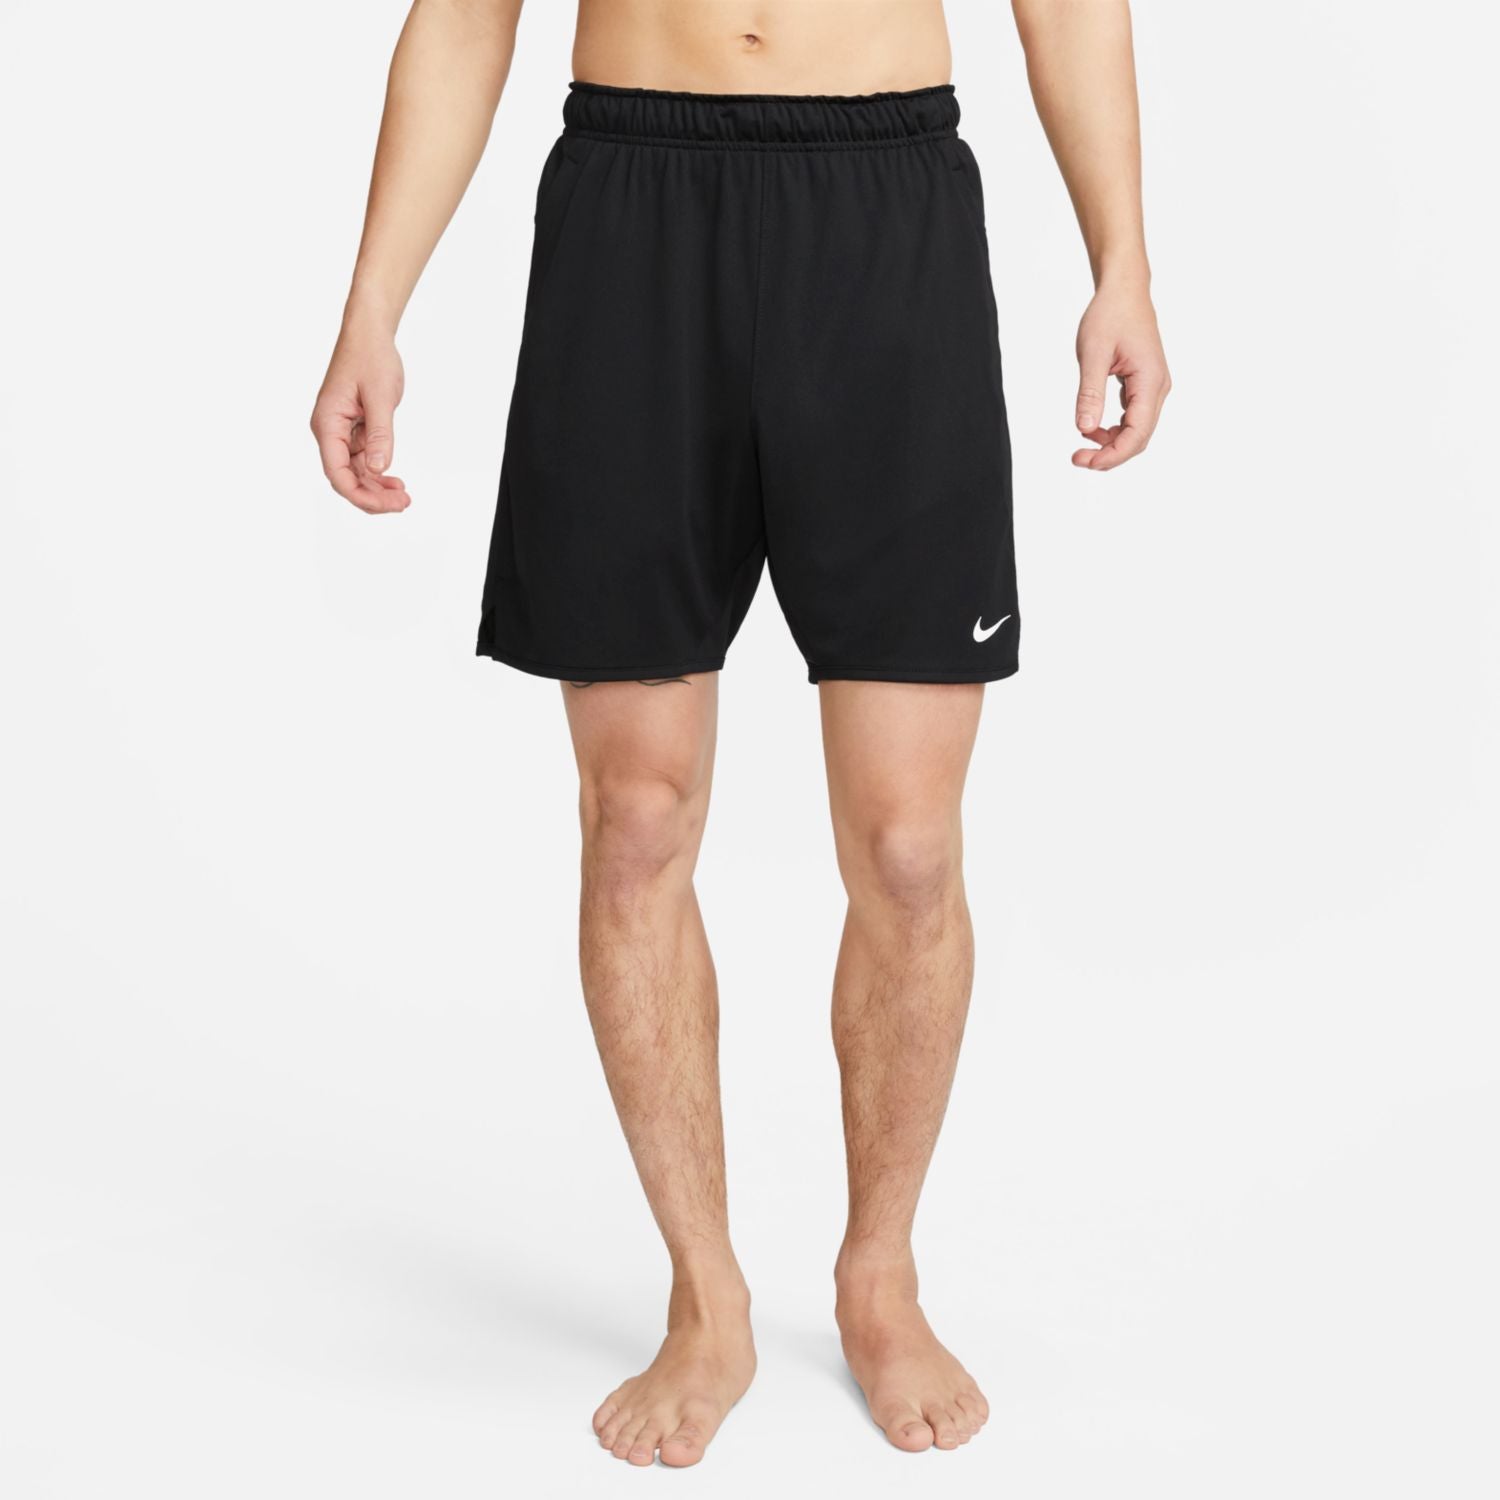 NIKE AS M NK DF TOTALTY KNT 7IN UL FB4197-010 SHORT TRAINING (M)